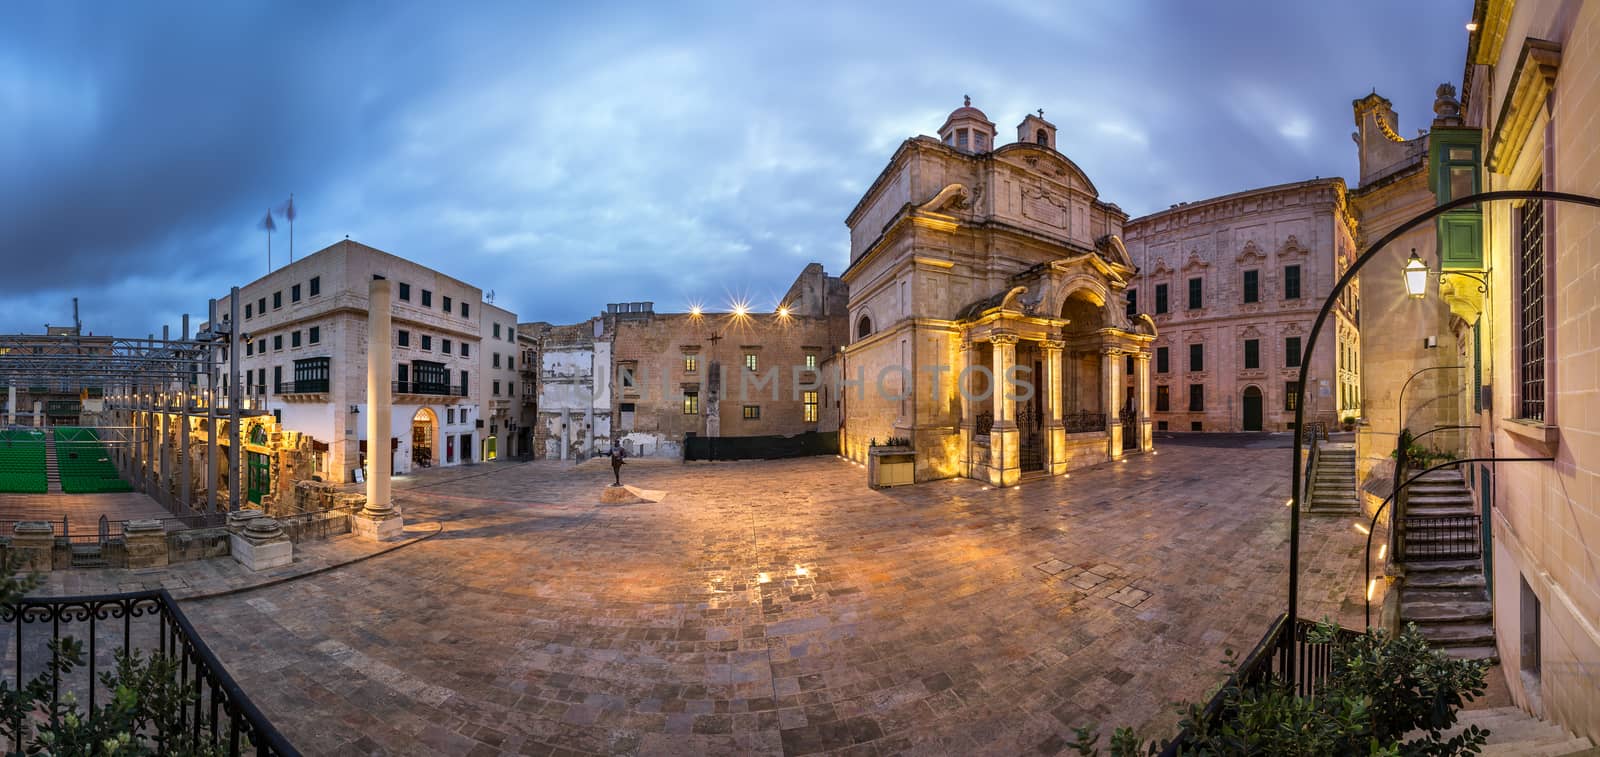 Panorama Saint Catherine of Italy Church and Jean Vallette Pjazza in the Morning, Vallette, Malta